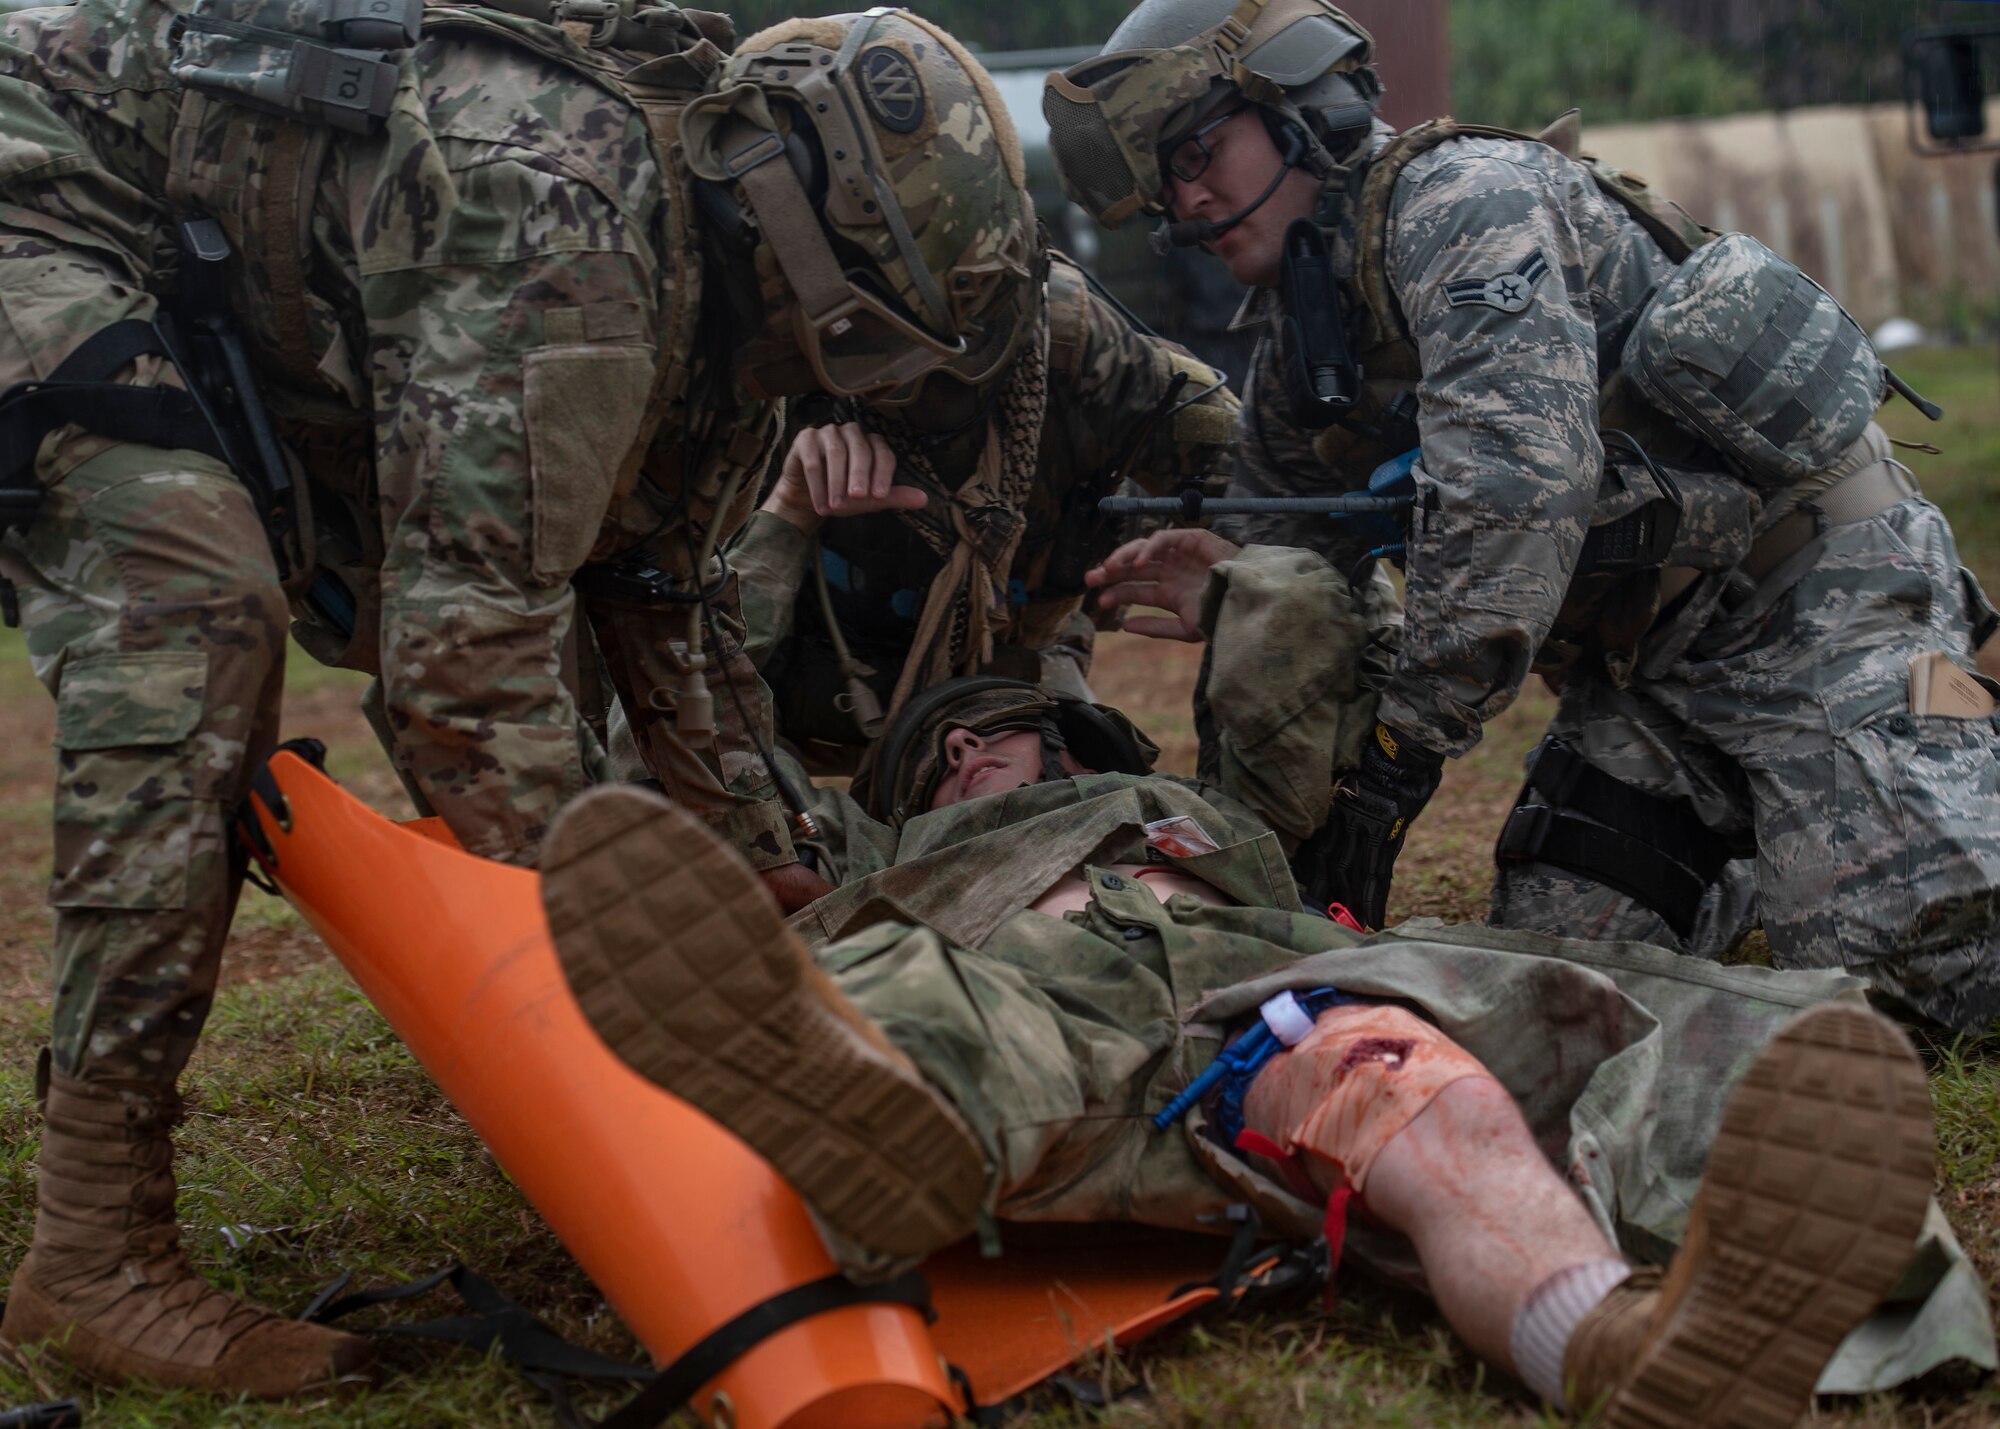 U.S. Airmen from the 644th Combat Communications Squadron perform Self Aid Buddy Care during Exercise Dragon Shield at Northwest Field, Guam, January 13, 2021.